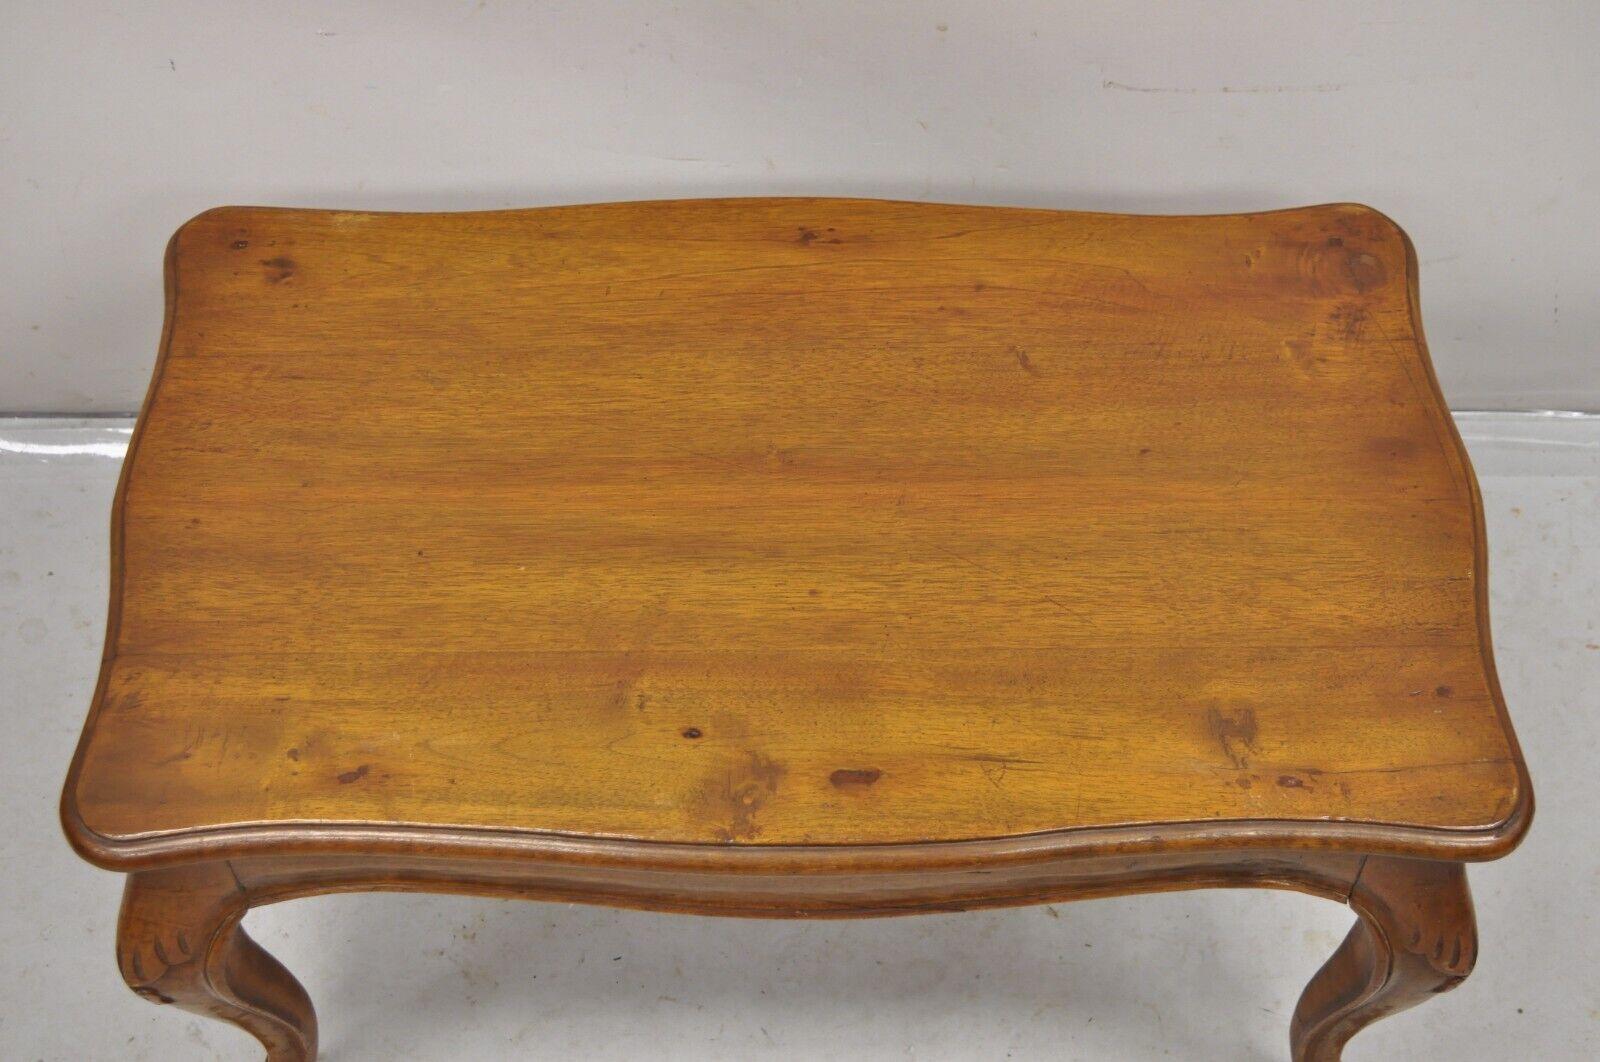 Vintage Italian Provincial Antiqued Walnut Small Cabriole Leg Coffee Table In Good Condition For Sale In Philadelphia, PA